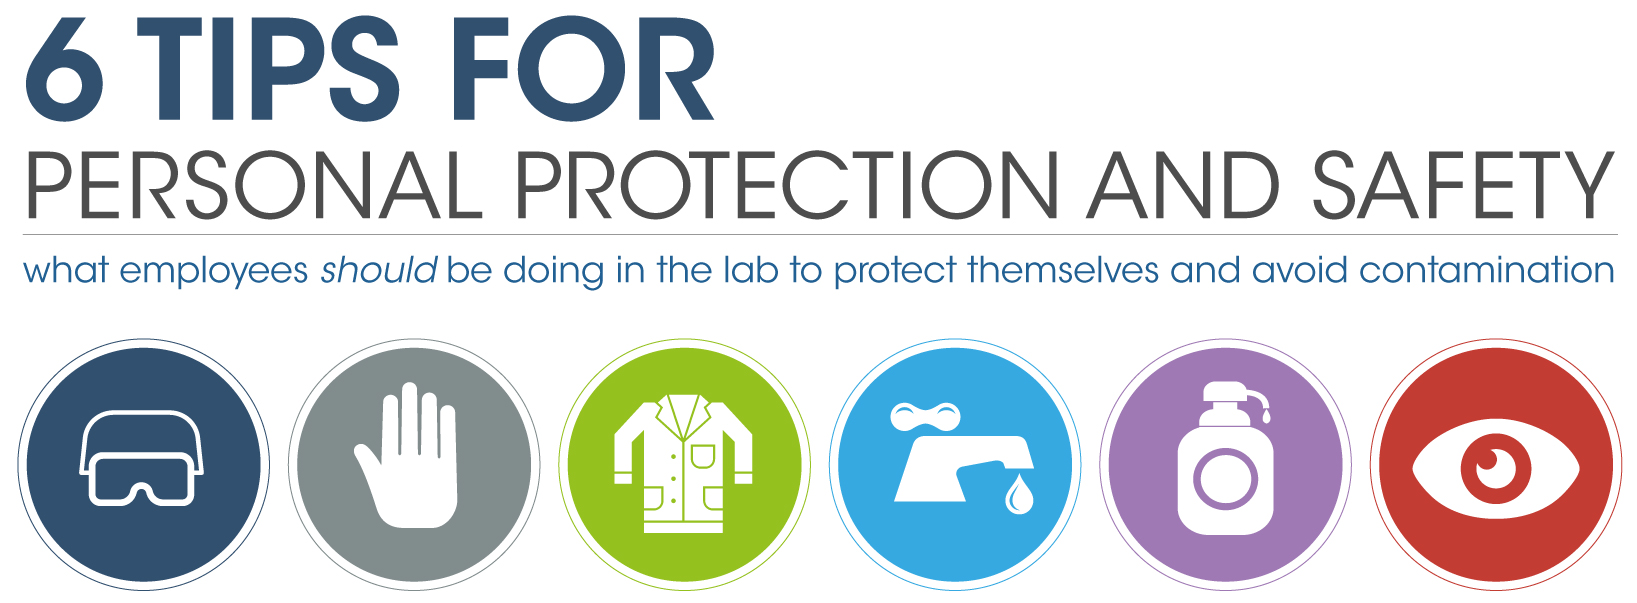 6 Tips For Personal Protection in a Laboratory